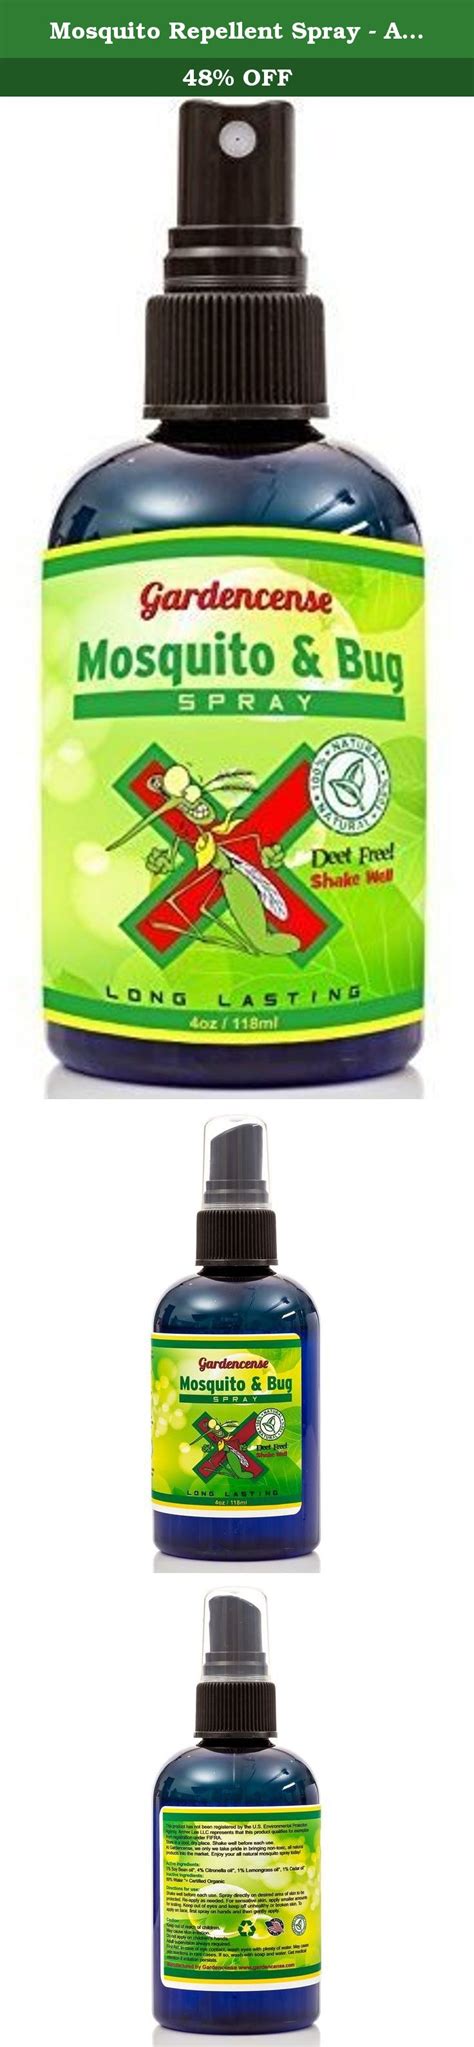 Mosquito Repellent Spray All Organic Insect Deterrent Repel